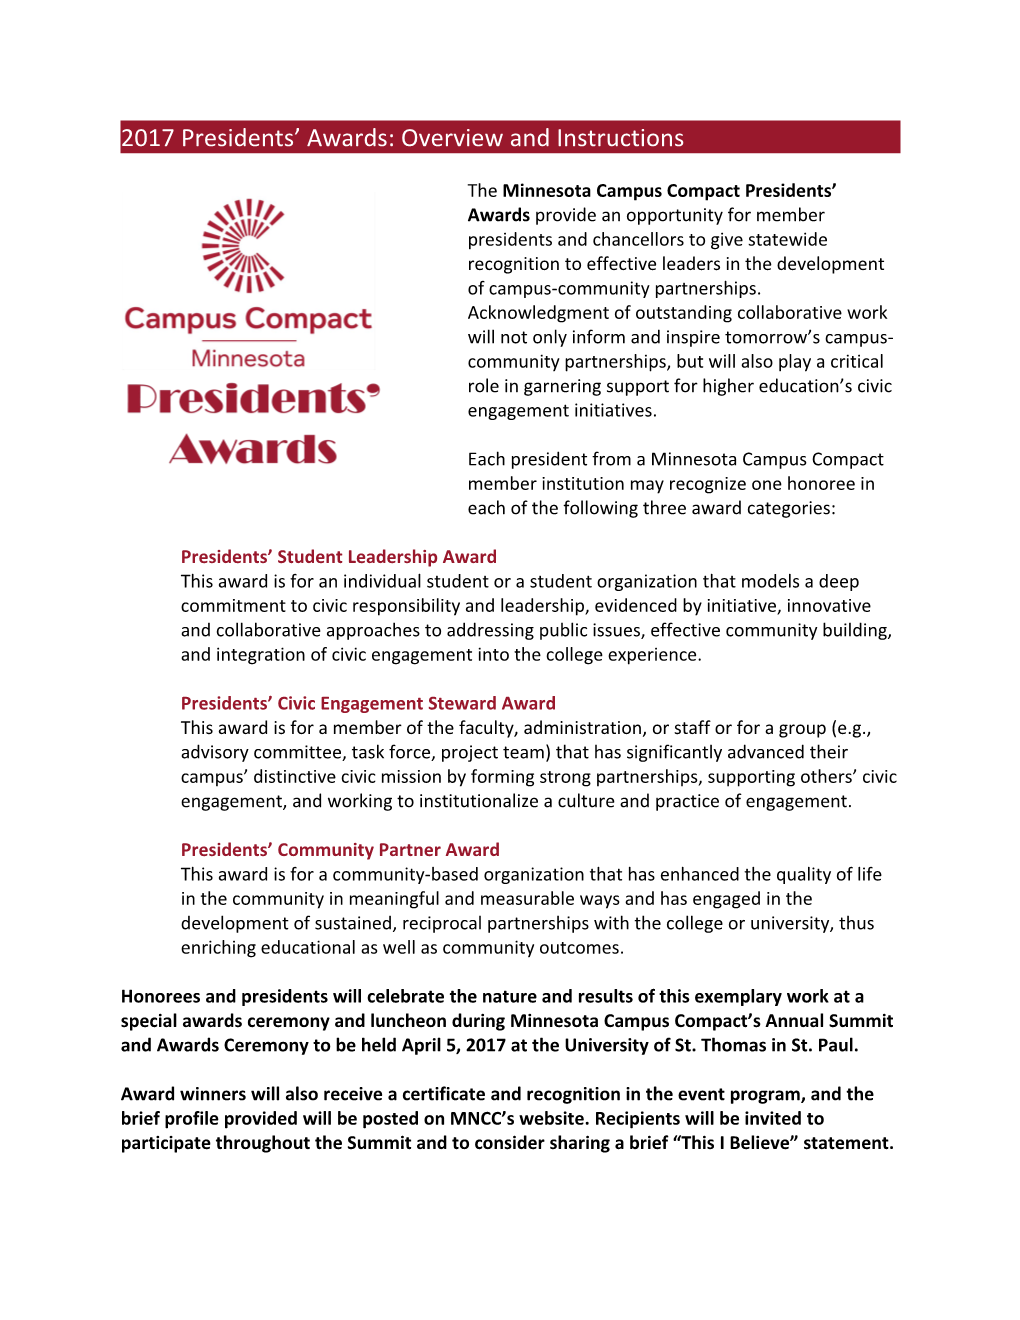 2017 Presidents Awards: Overview and Instructions